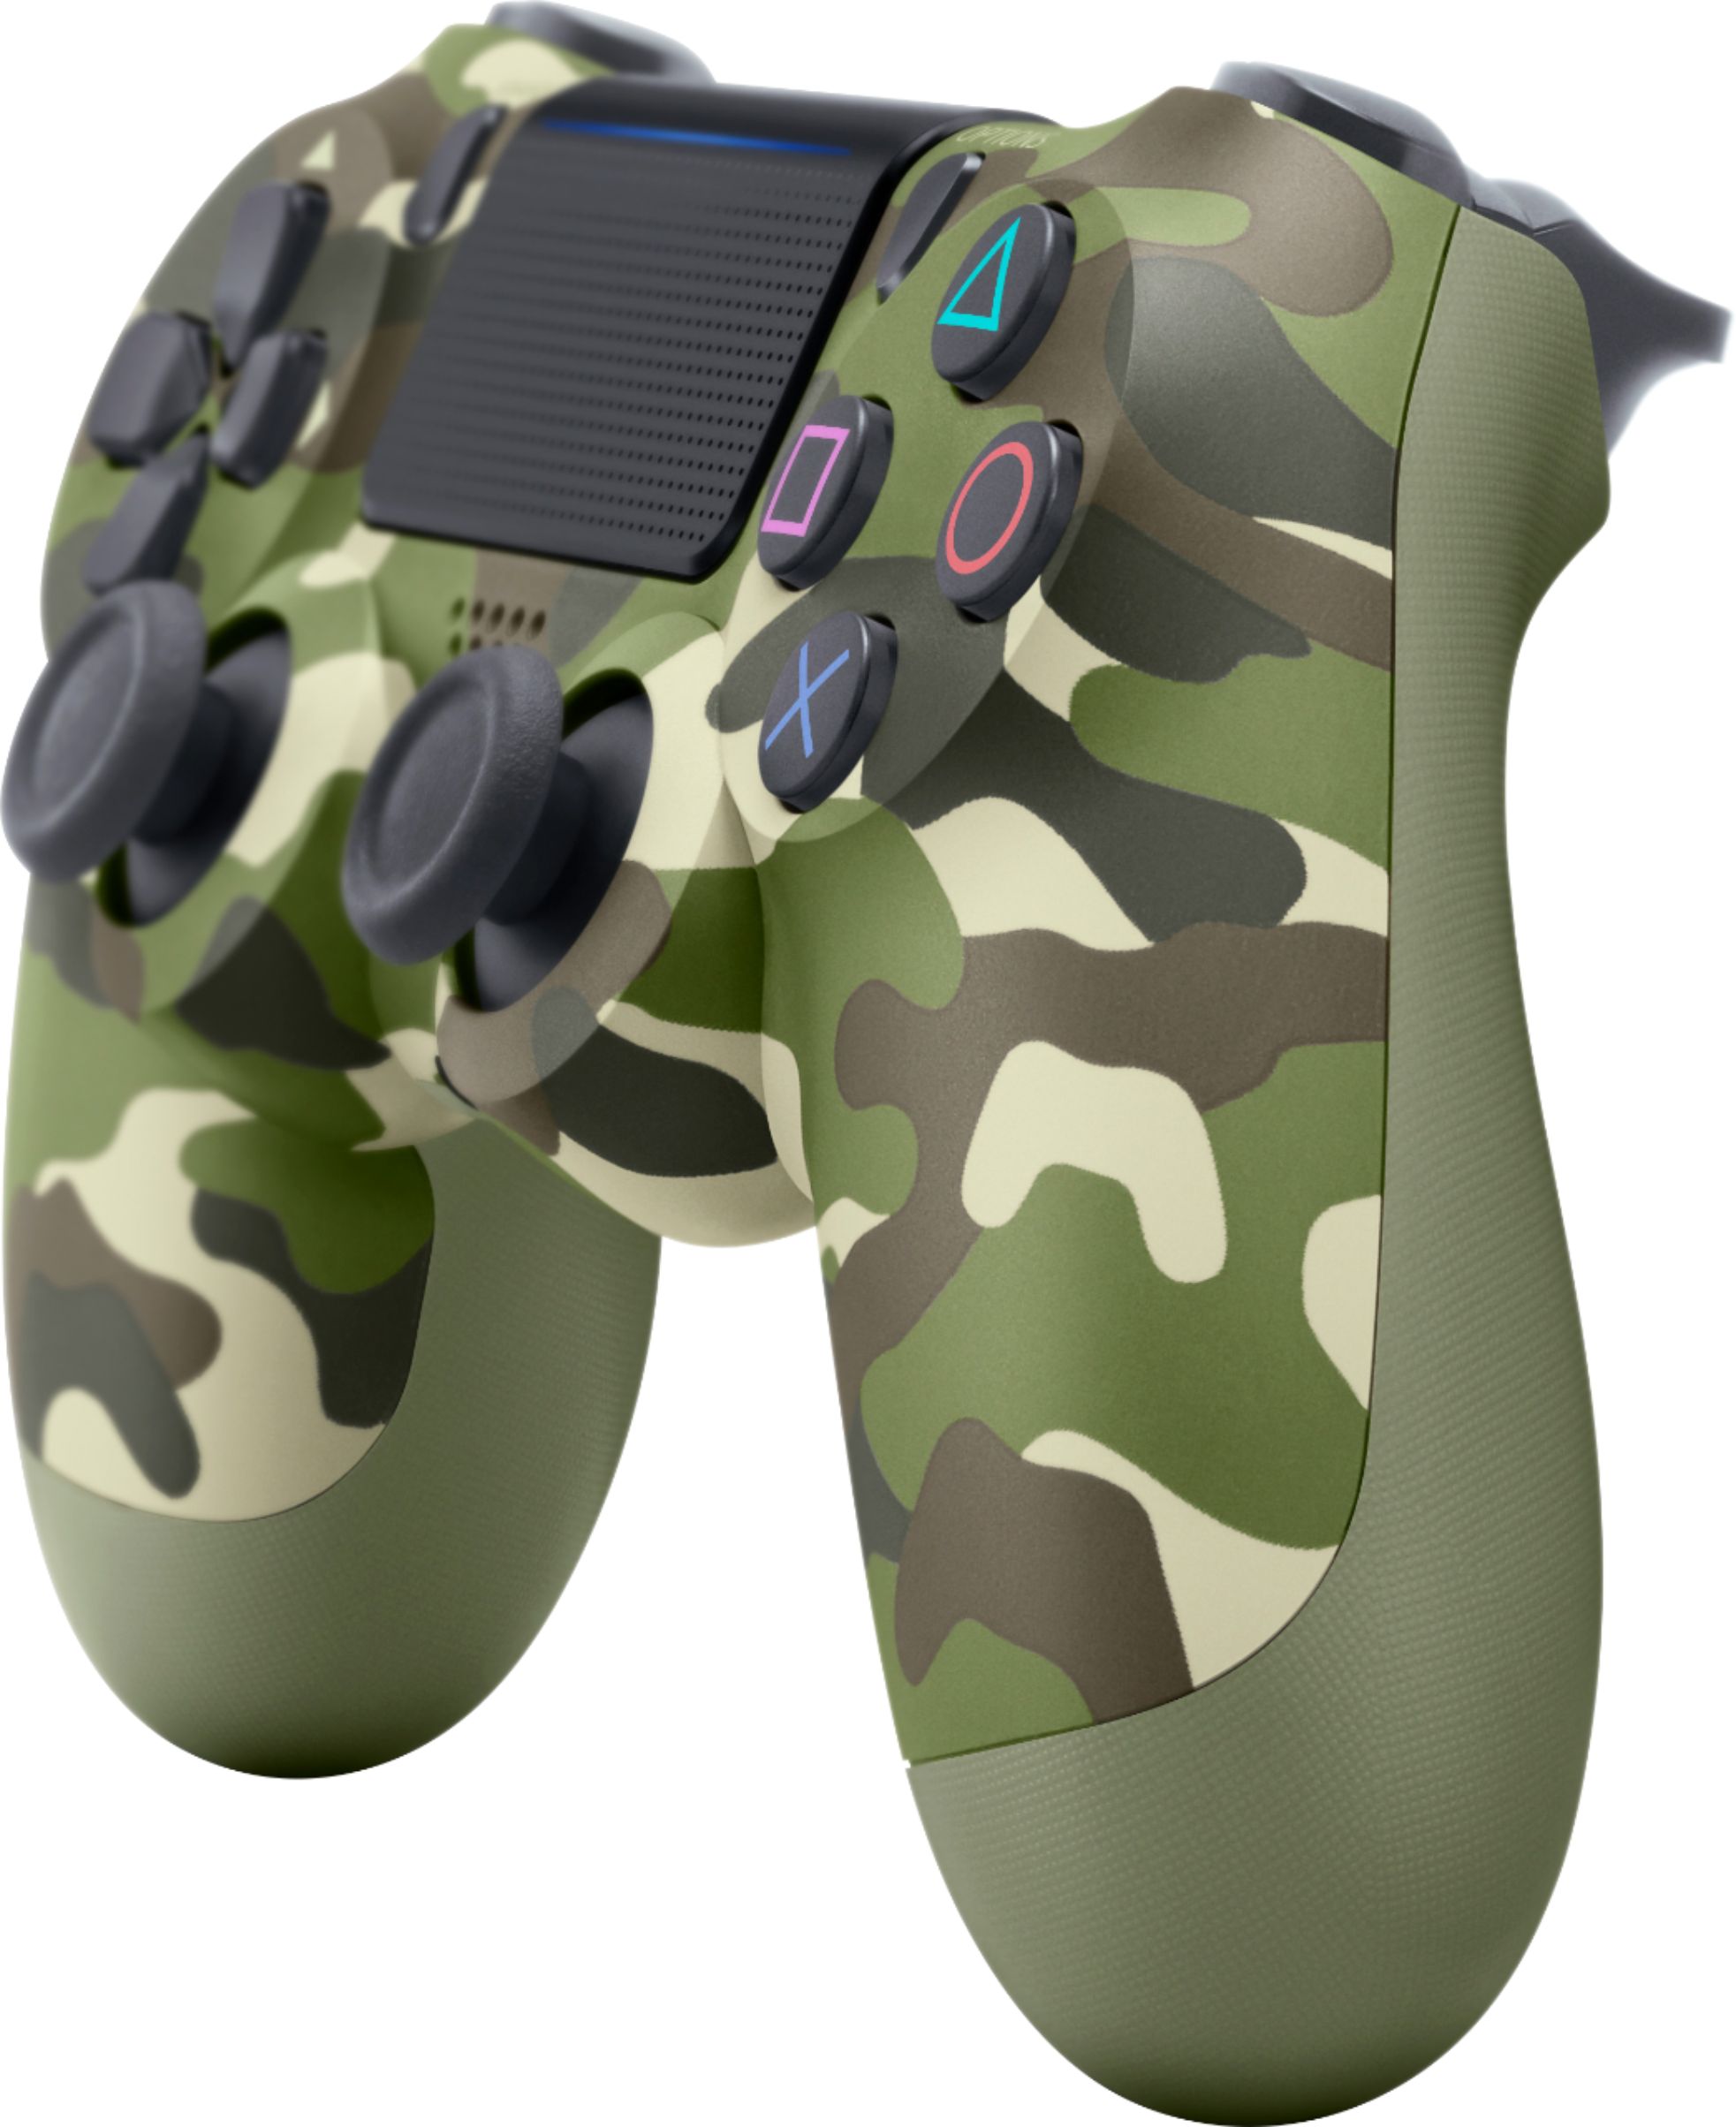 Angle View: Sony - Geek Squad Certified Refurbished DualShock 4 Wireless Controller for PlayStation 4 - Green Camouflage